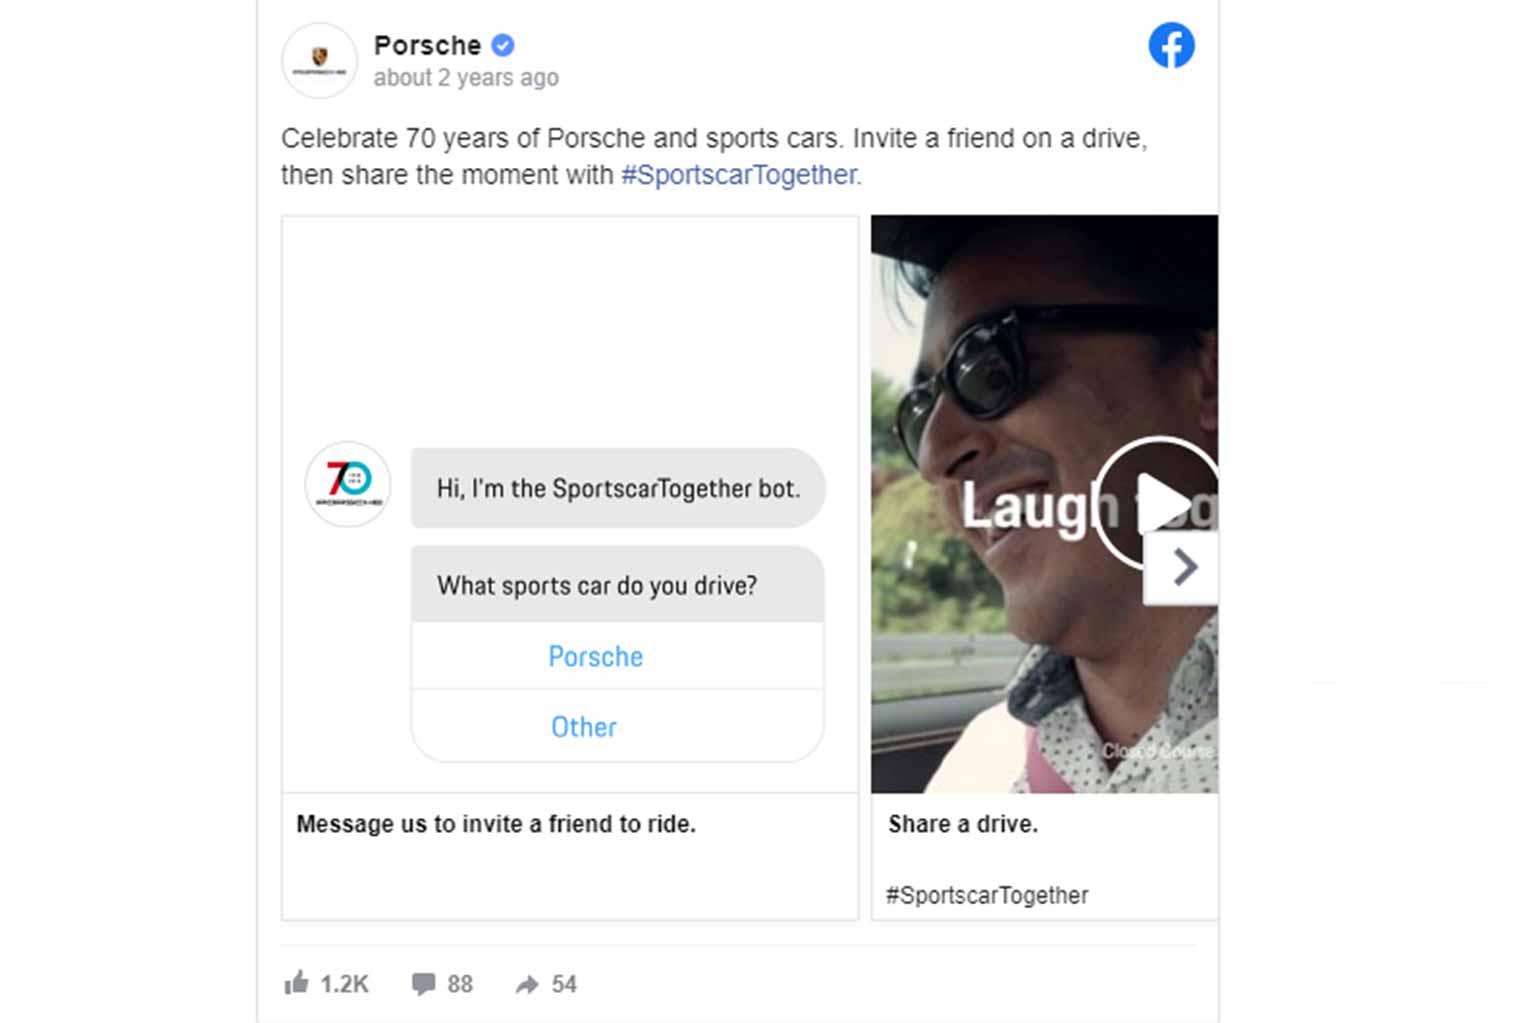 Paid Porsche ad on Facebook with a picture of a man with sunglasses smiling.